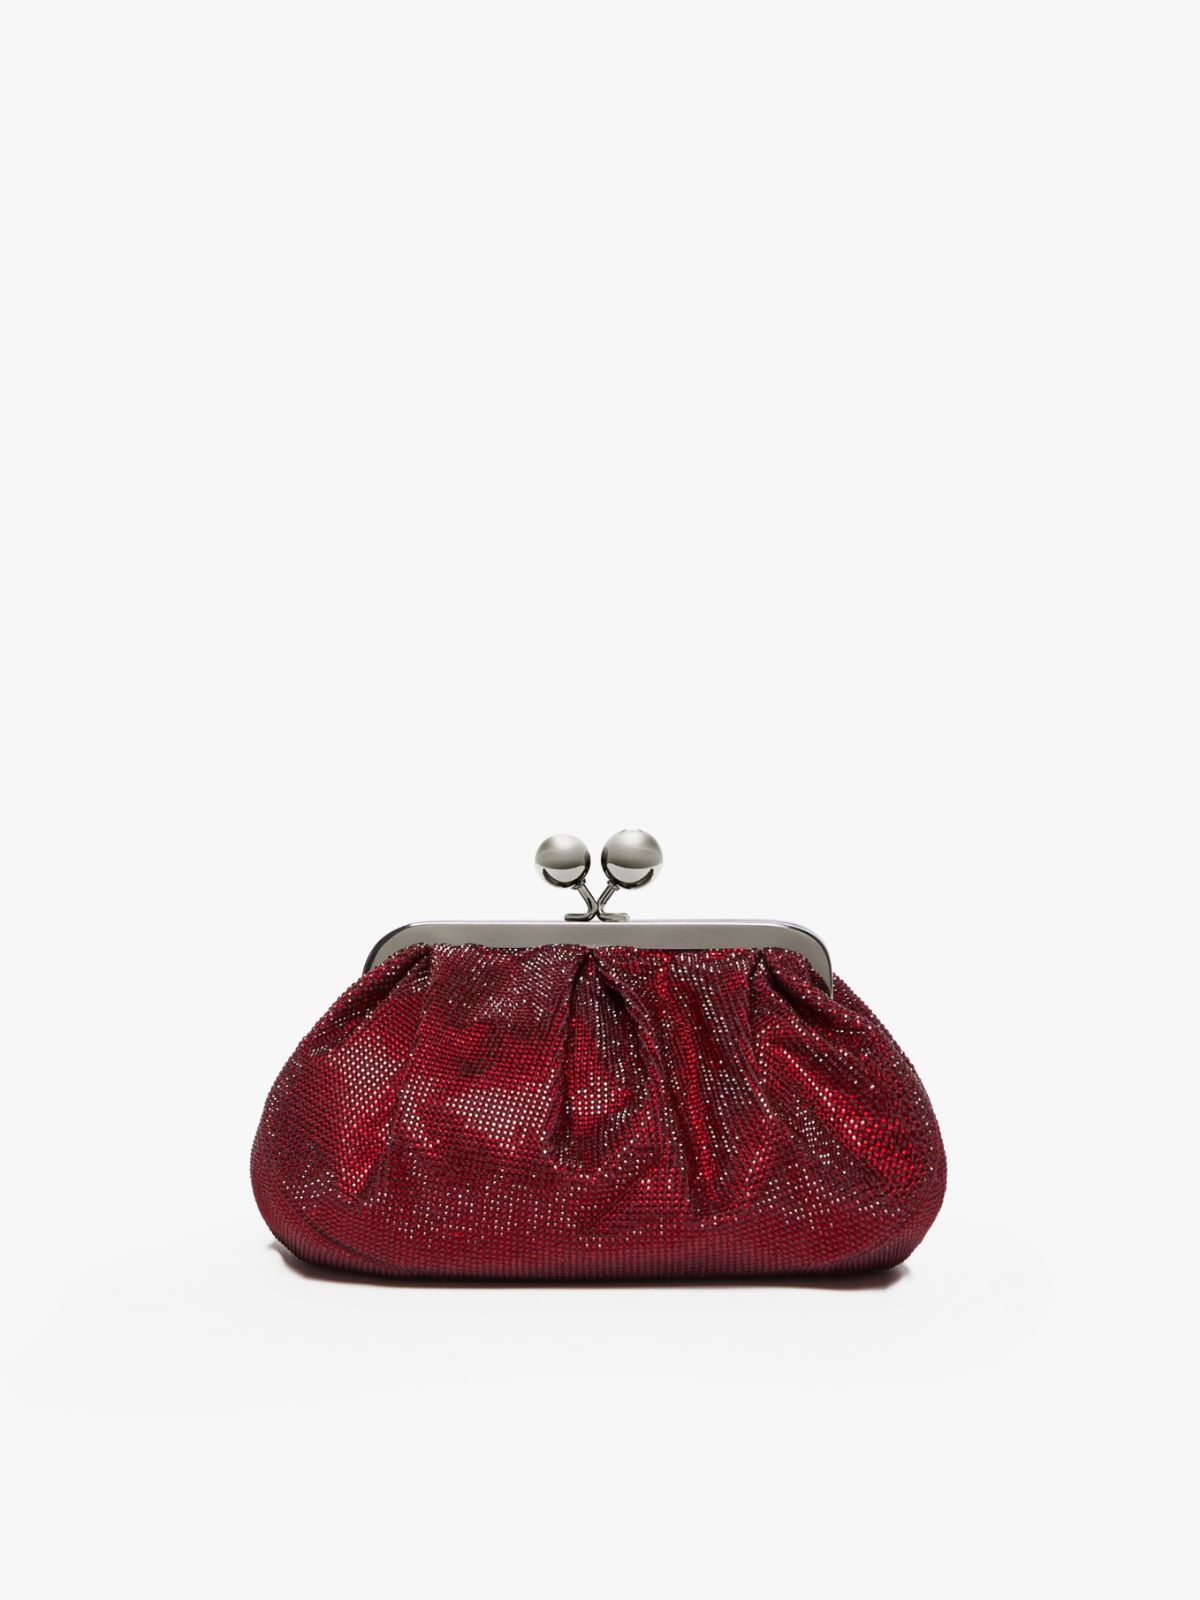 Pasticcino Bag Small in strass - ROSSO - Weekend Max Mara - 3